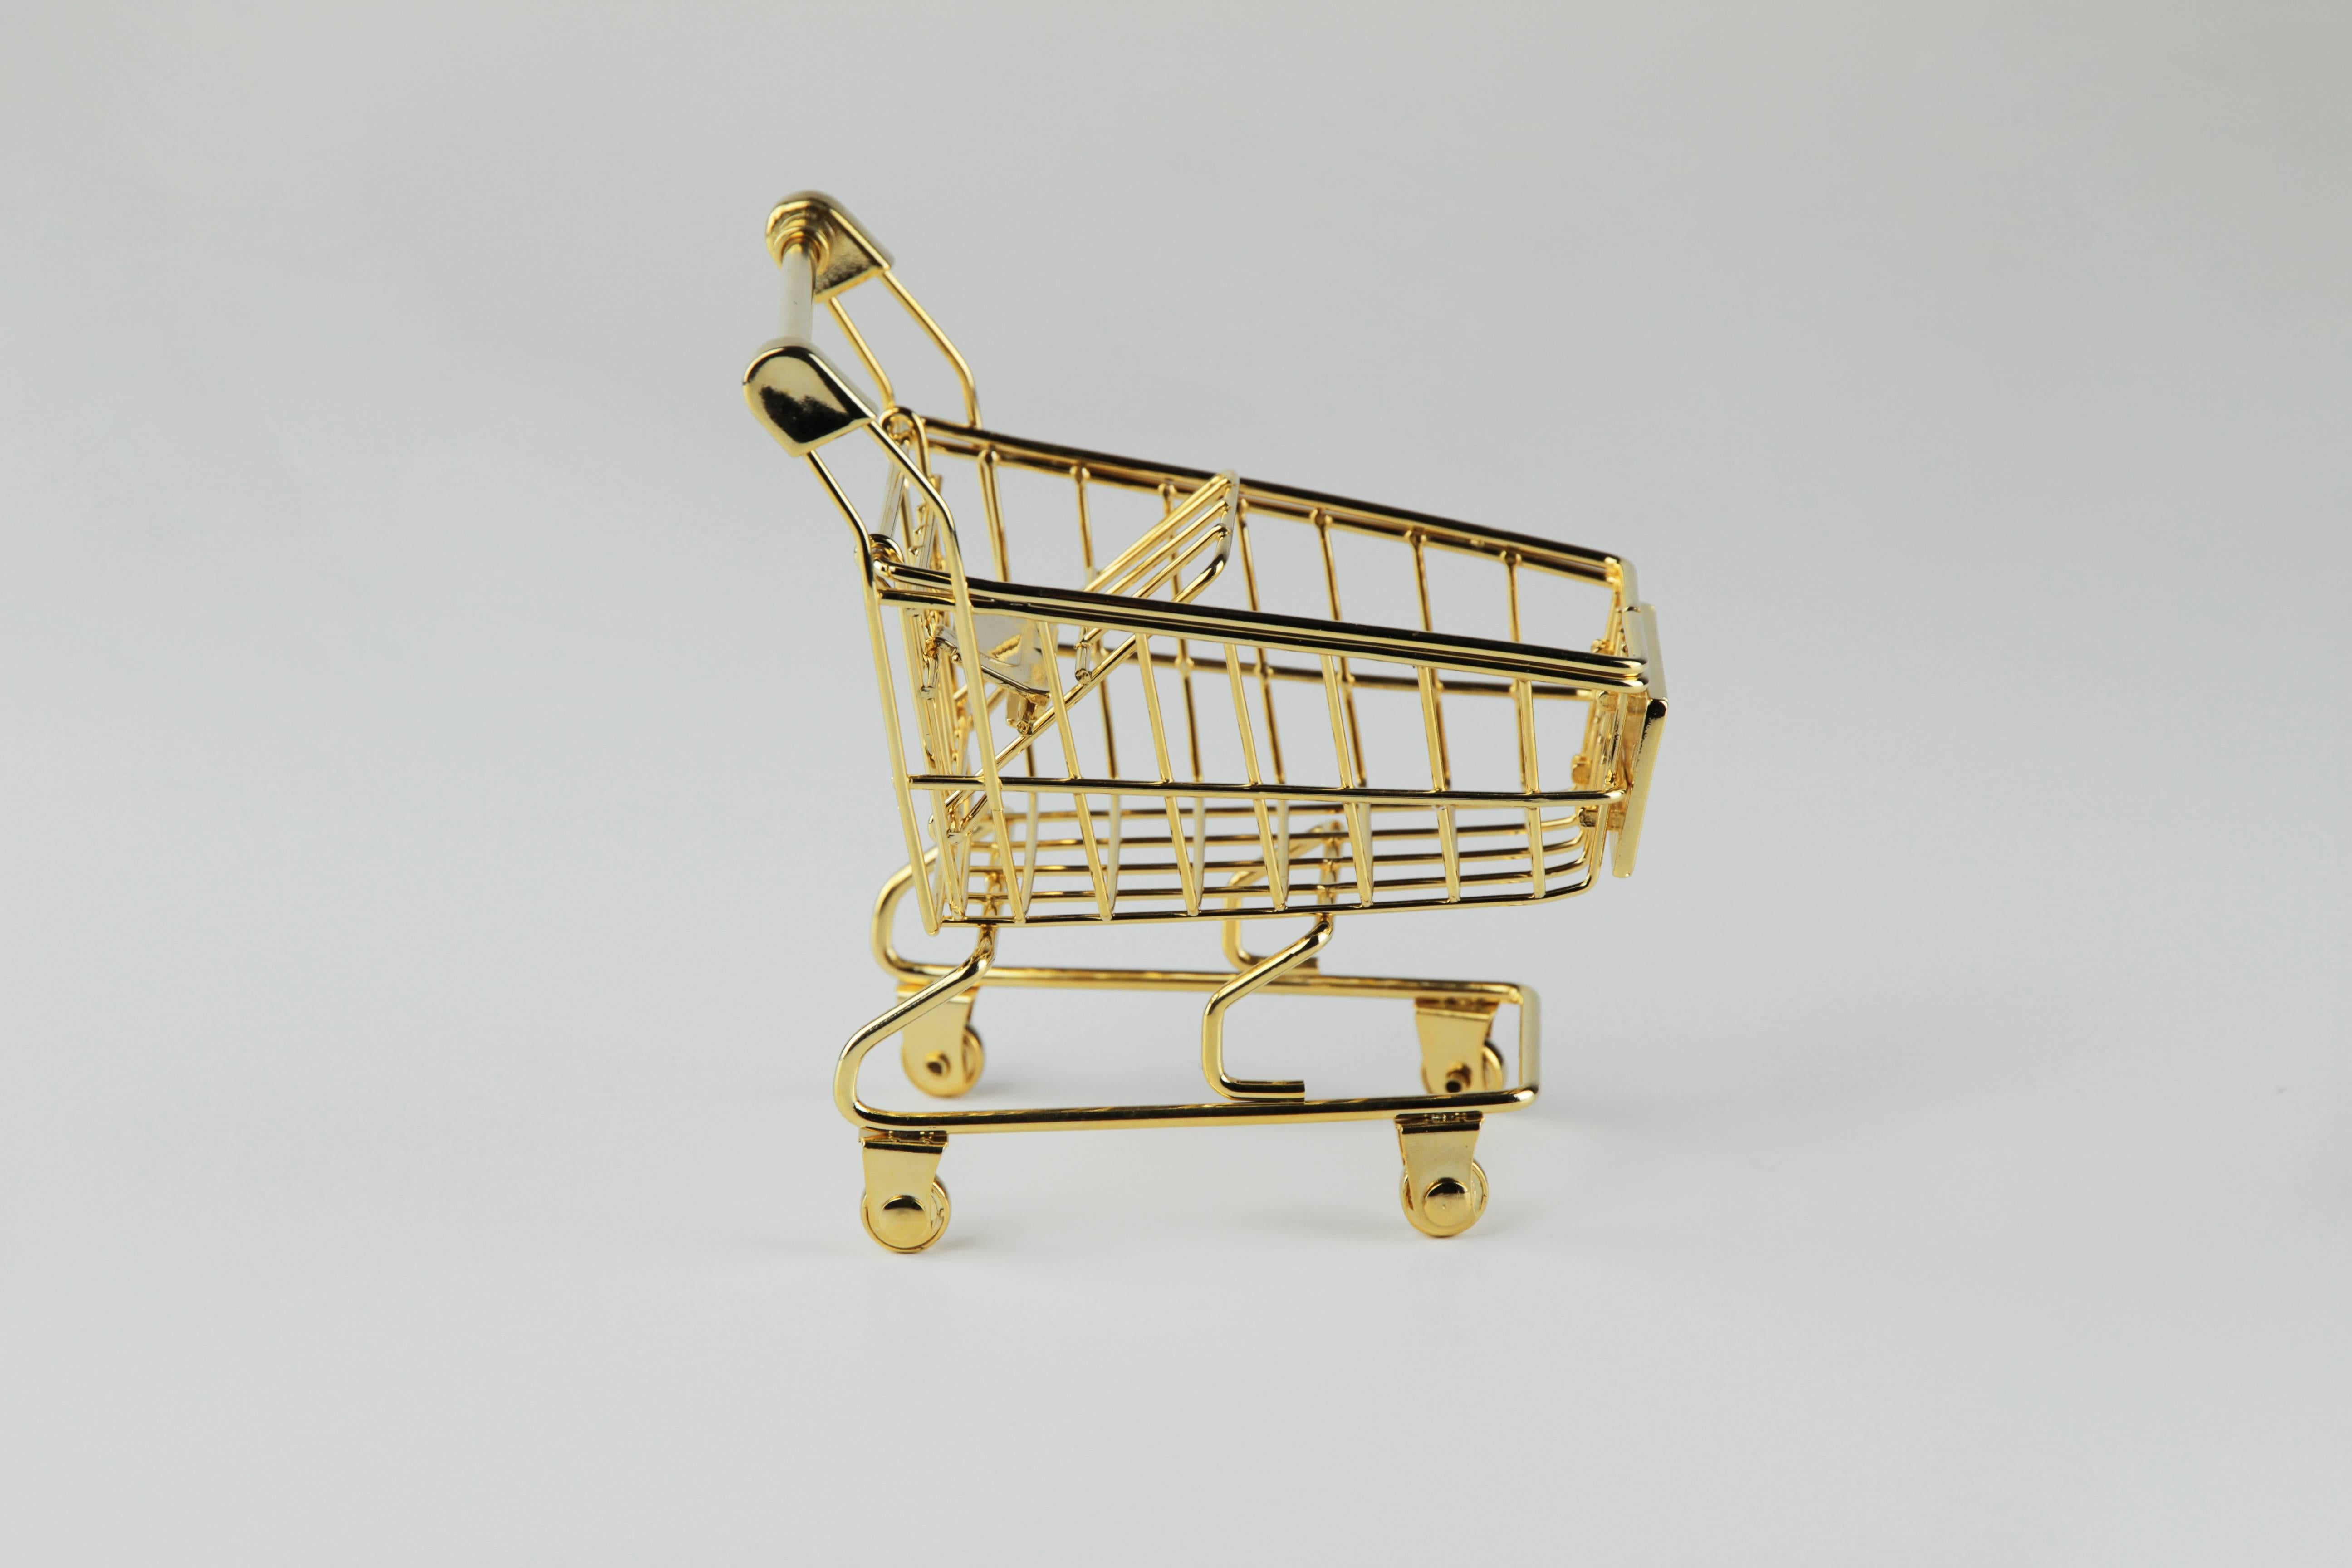 The 'Gold Cart' is a fully articulated working shopping cart. It is made of steel and bronze then 24K gold plated.
This is an addition of 100+ artist proof. 
'Gold Cart' is really fun activated in a group, yet is quite charming on its own!
Made in